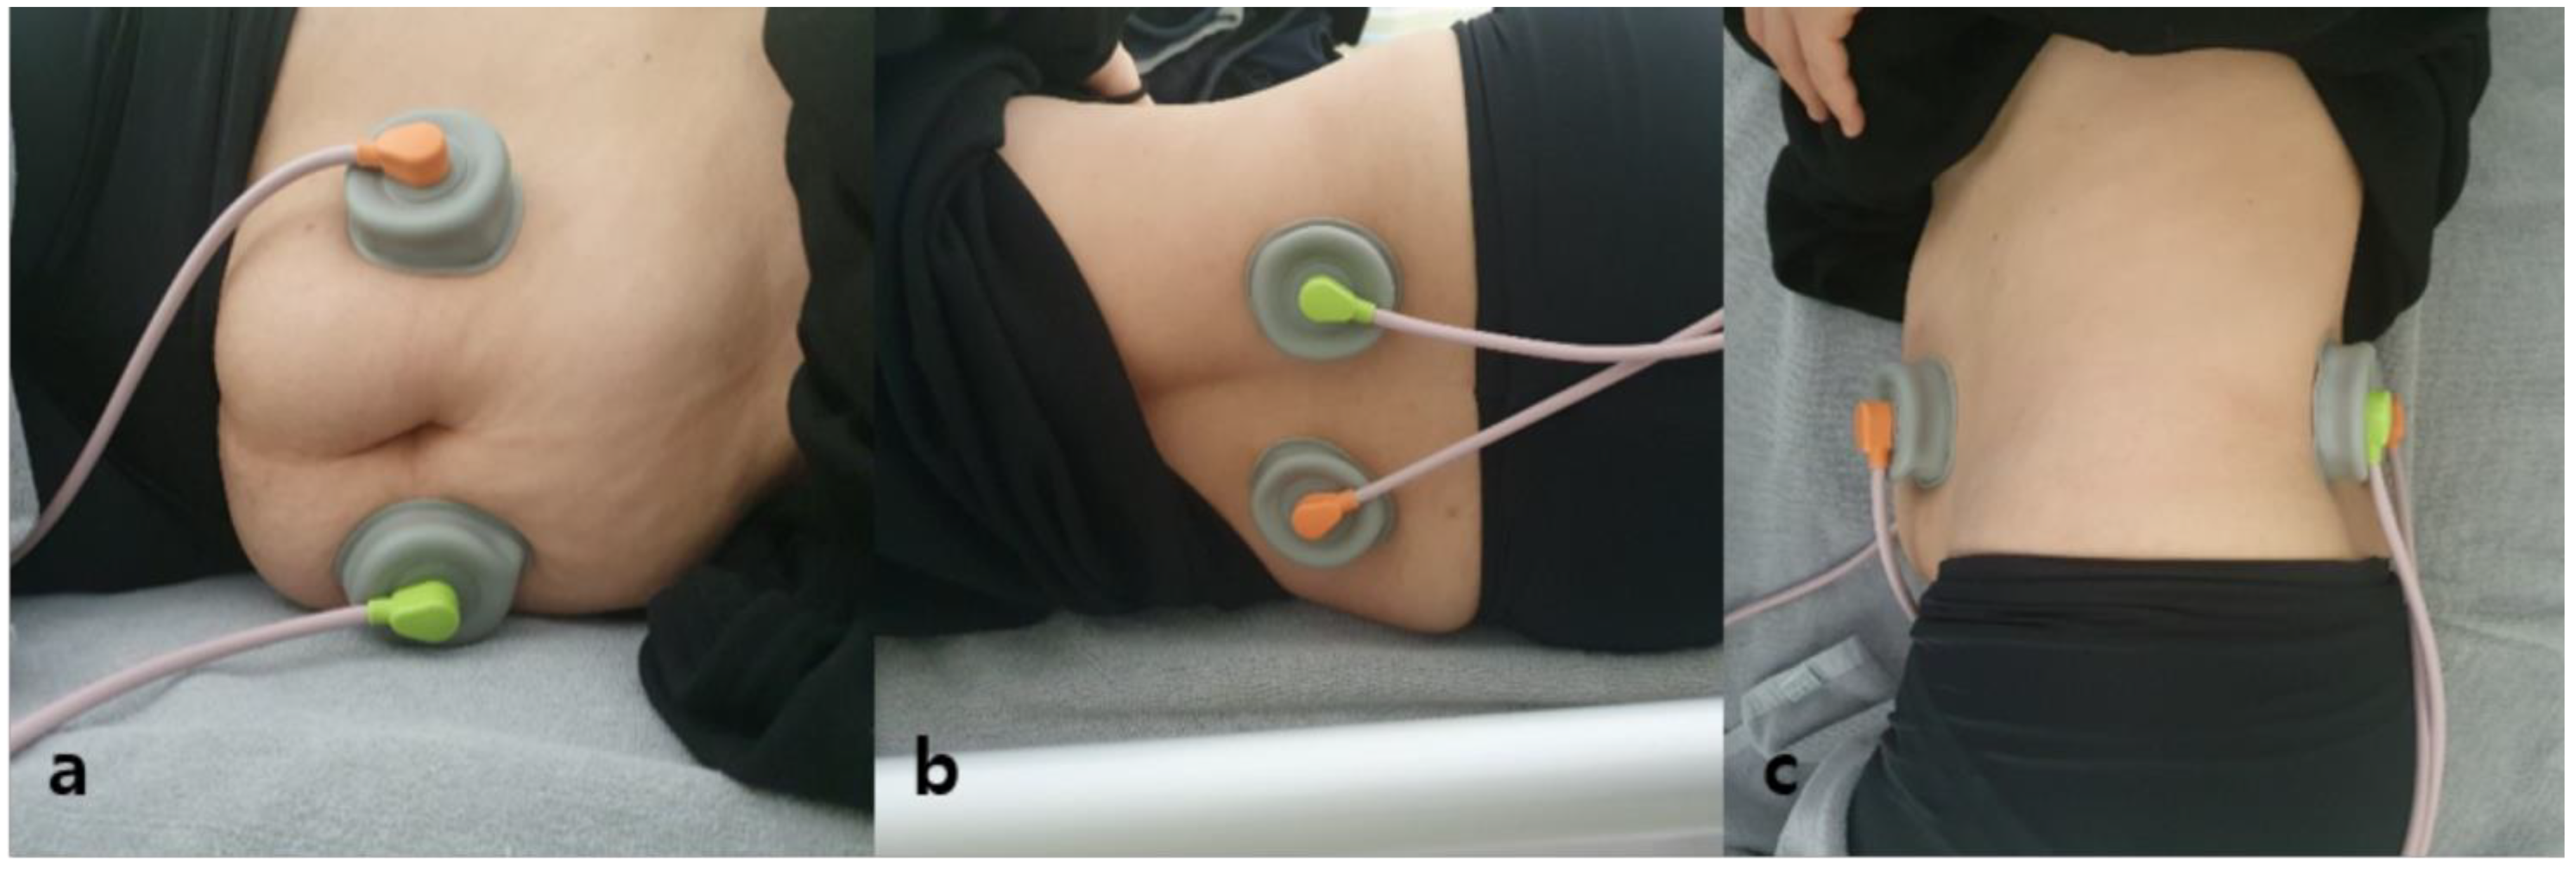 Electrode placement for home-based interferential electrical